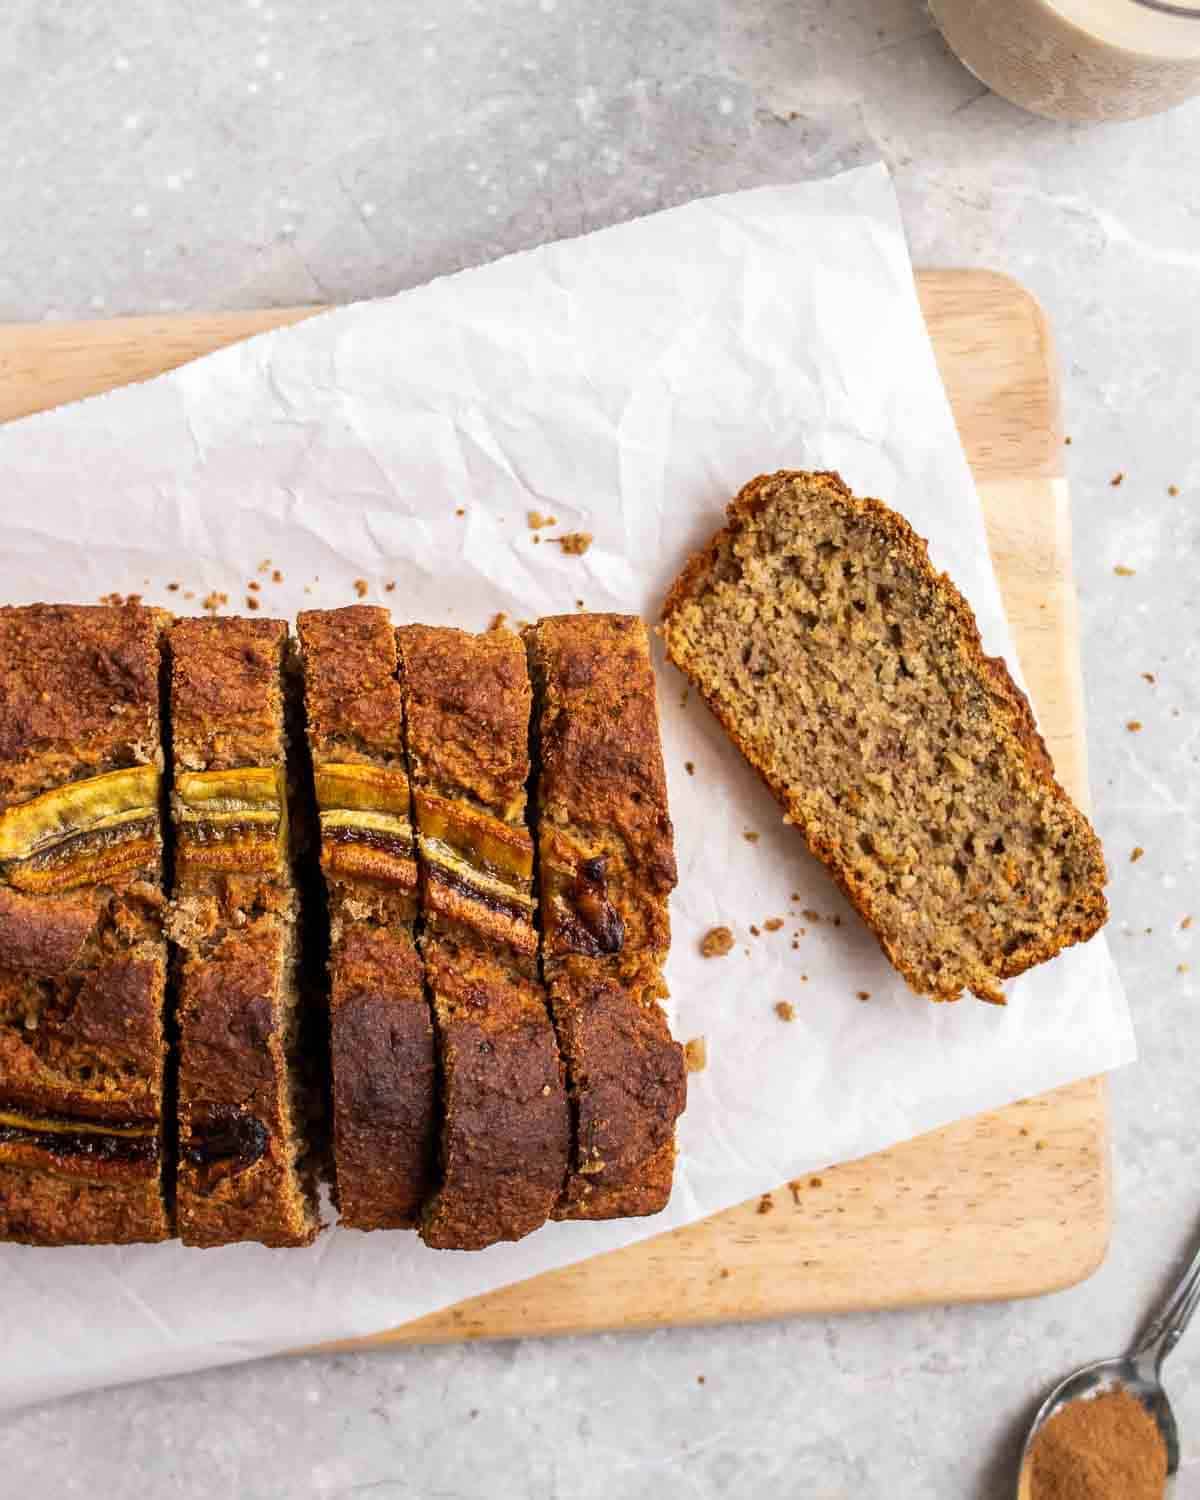 banana bread loaf sliced on paper on a wooden board.